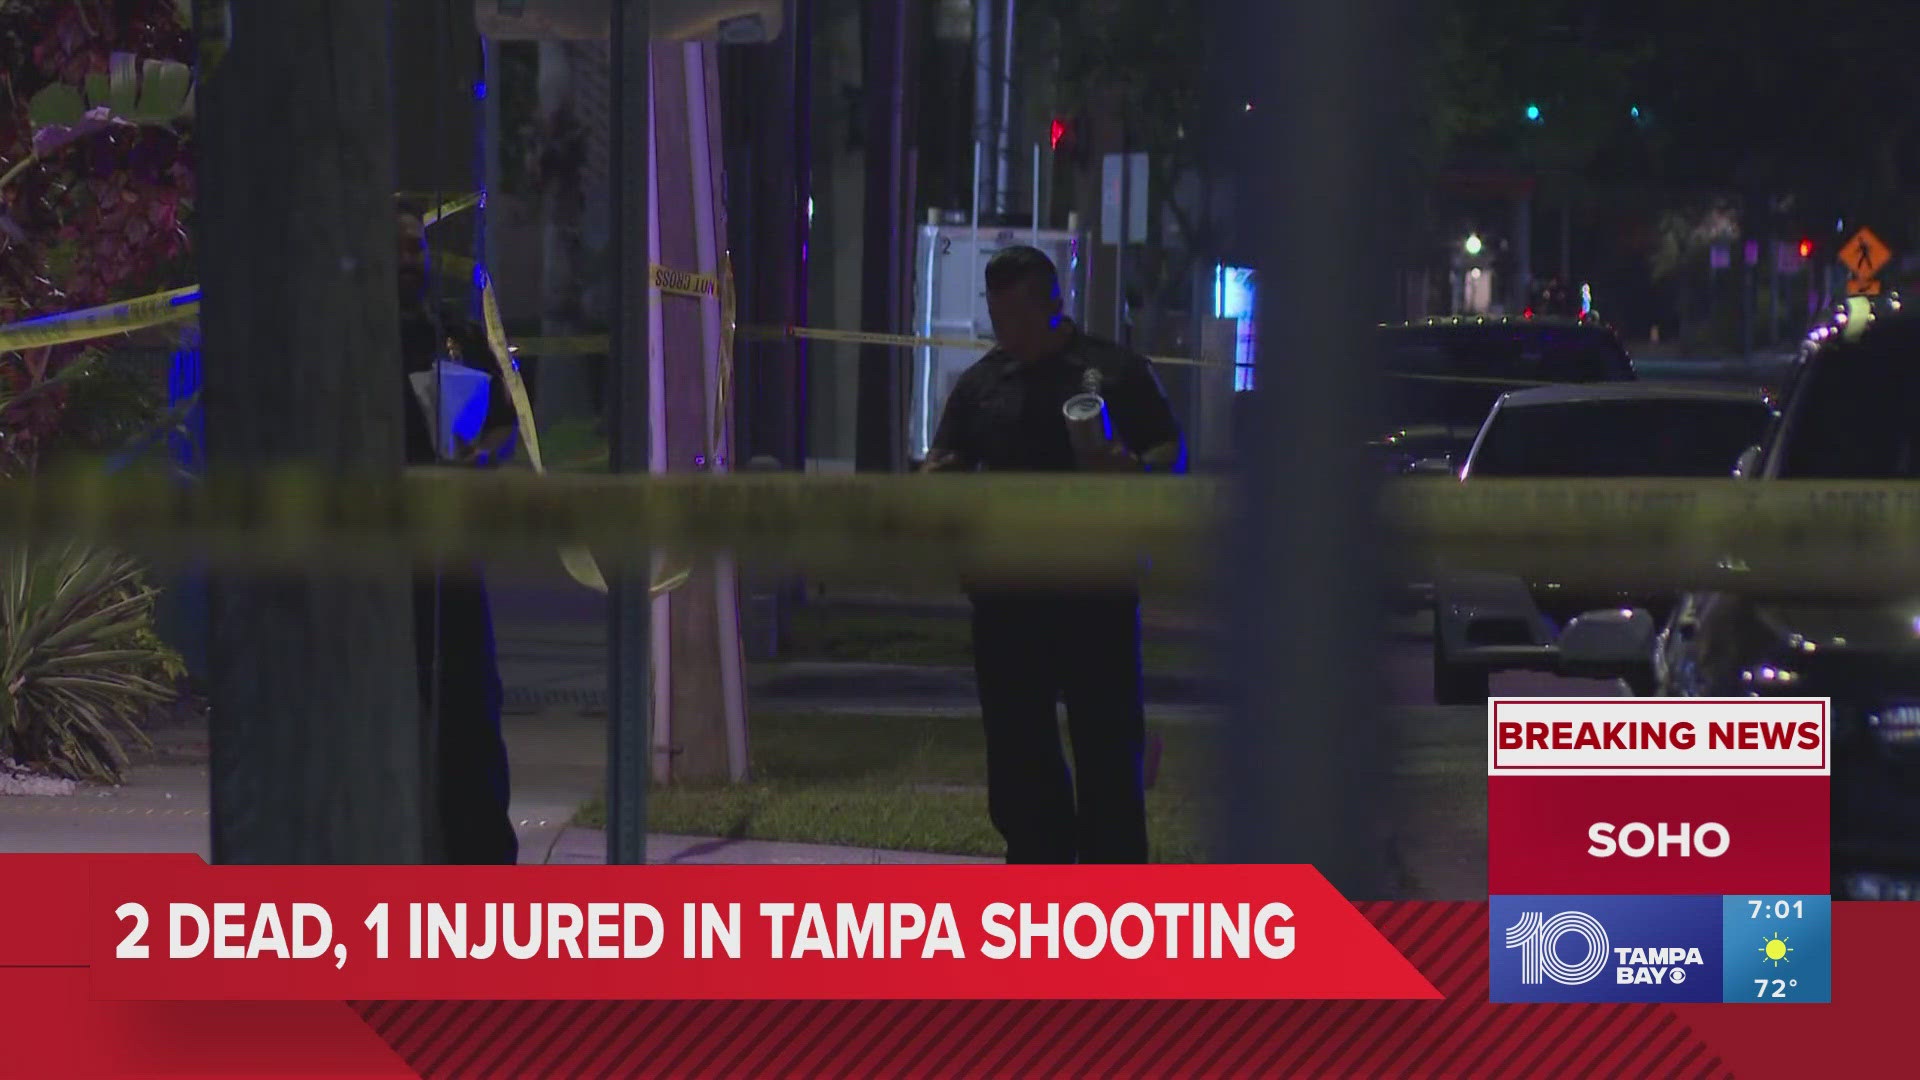 A shooting on Sunday morning in Tampa left two dead and one injured.